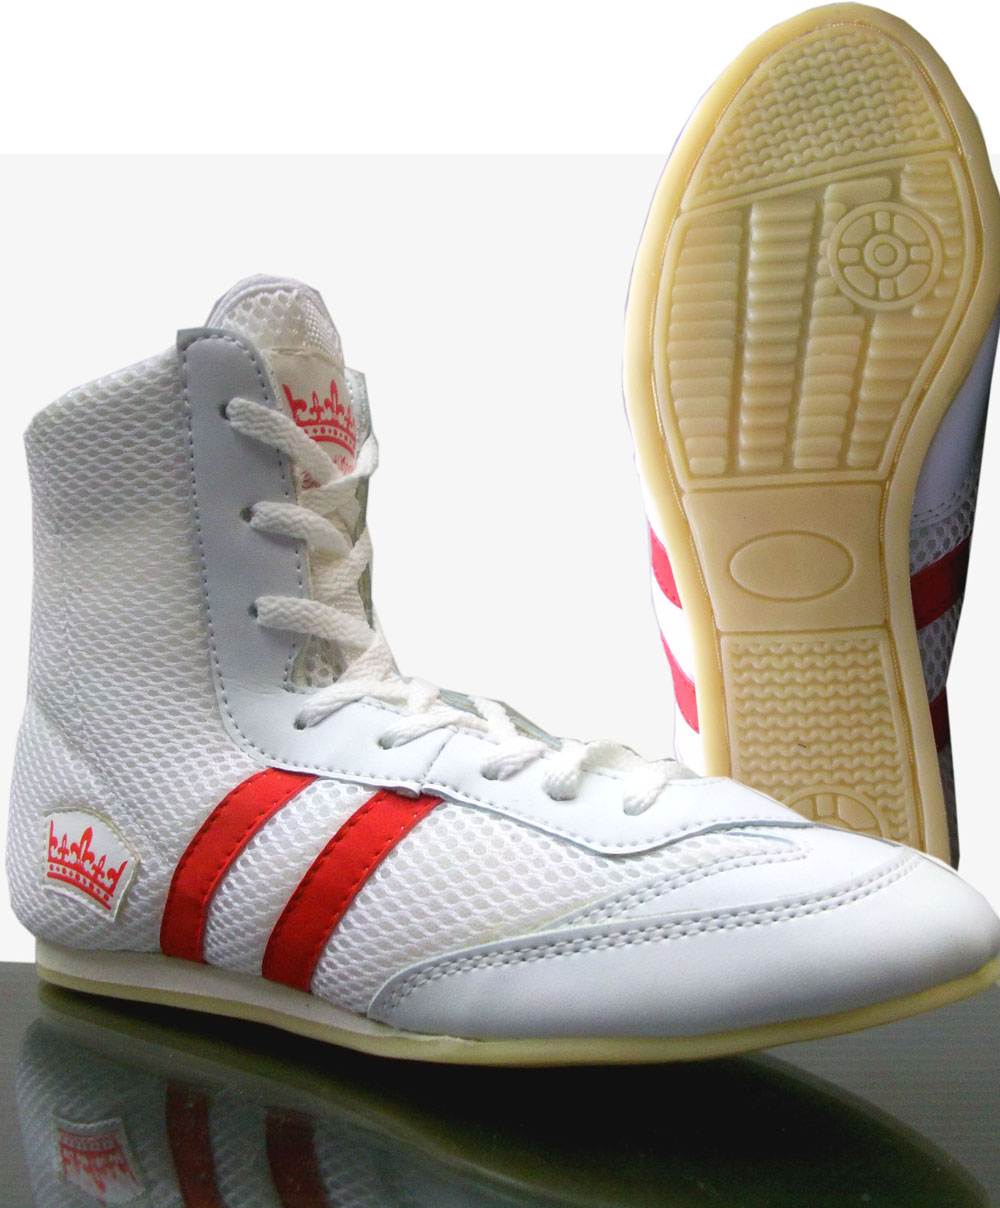 Boxing Boot Wrestling Martial Arts (Not Box Hog) Unisex Adult & Junior White /red